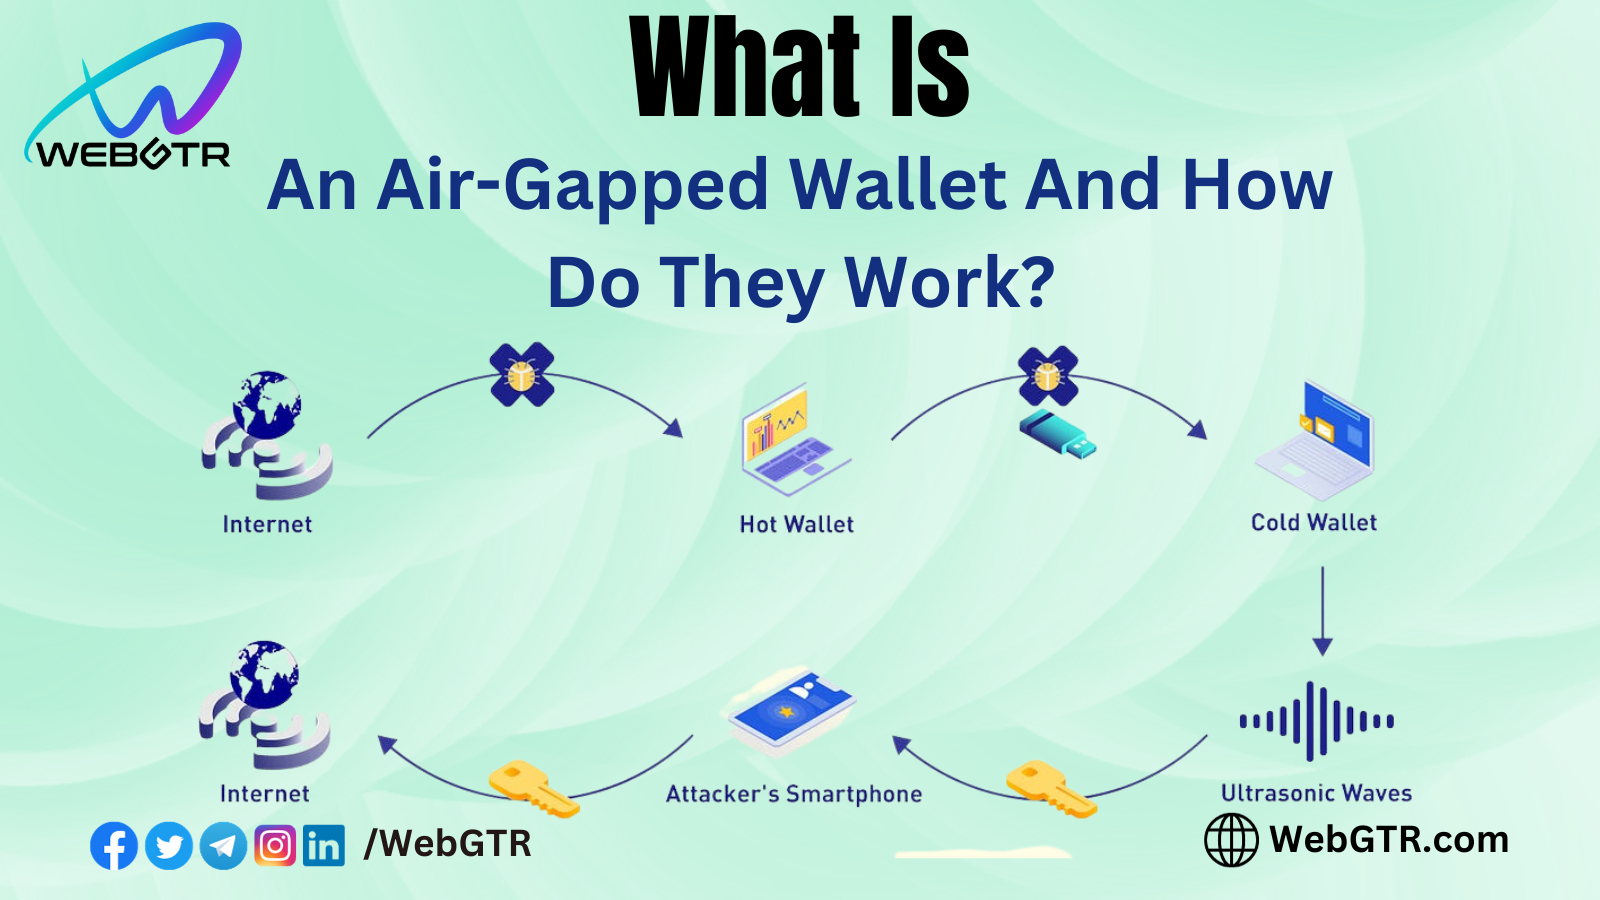 What Is An Air-Gapped Wallet And How Do They Work?